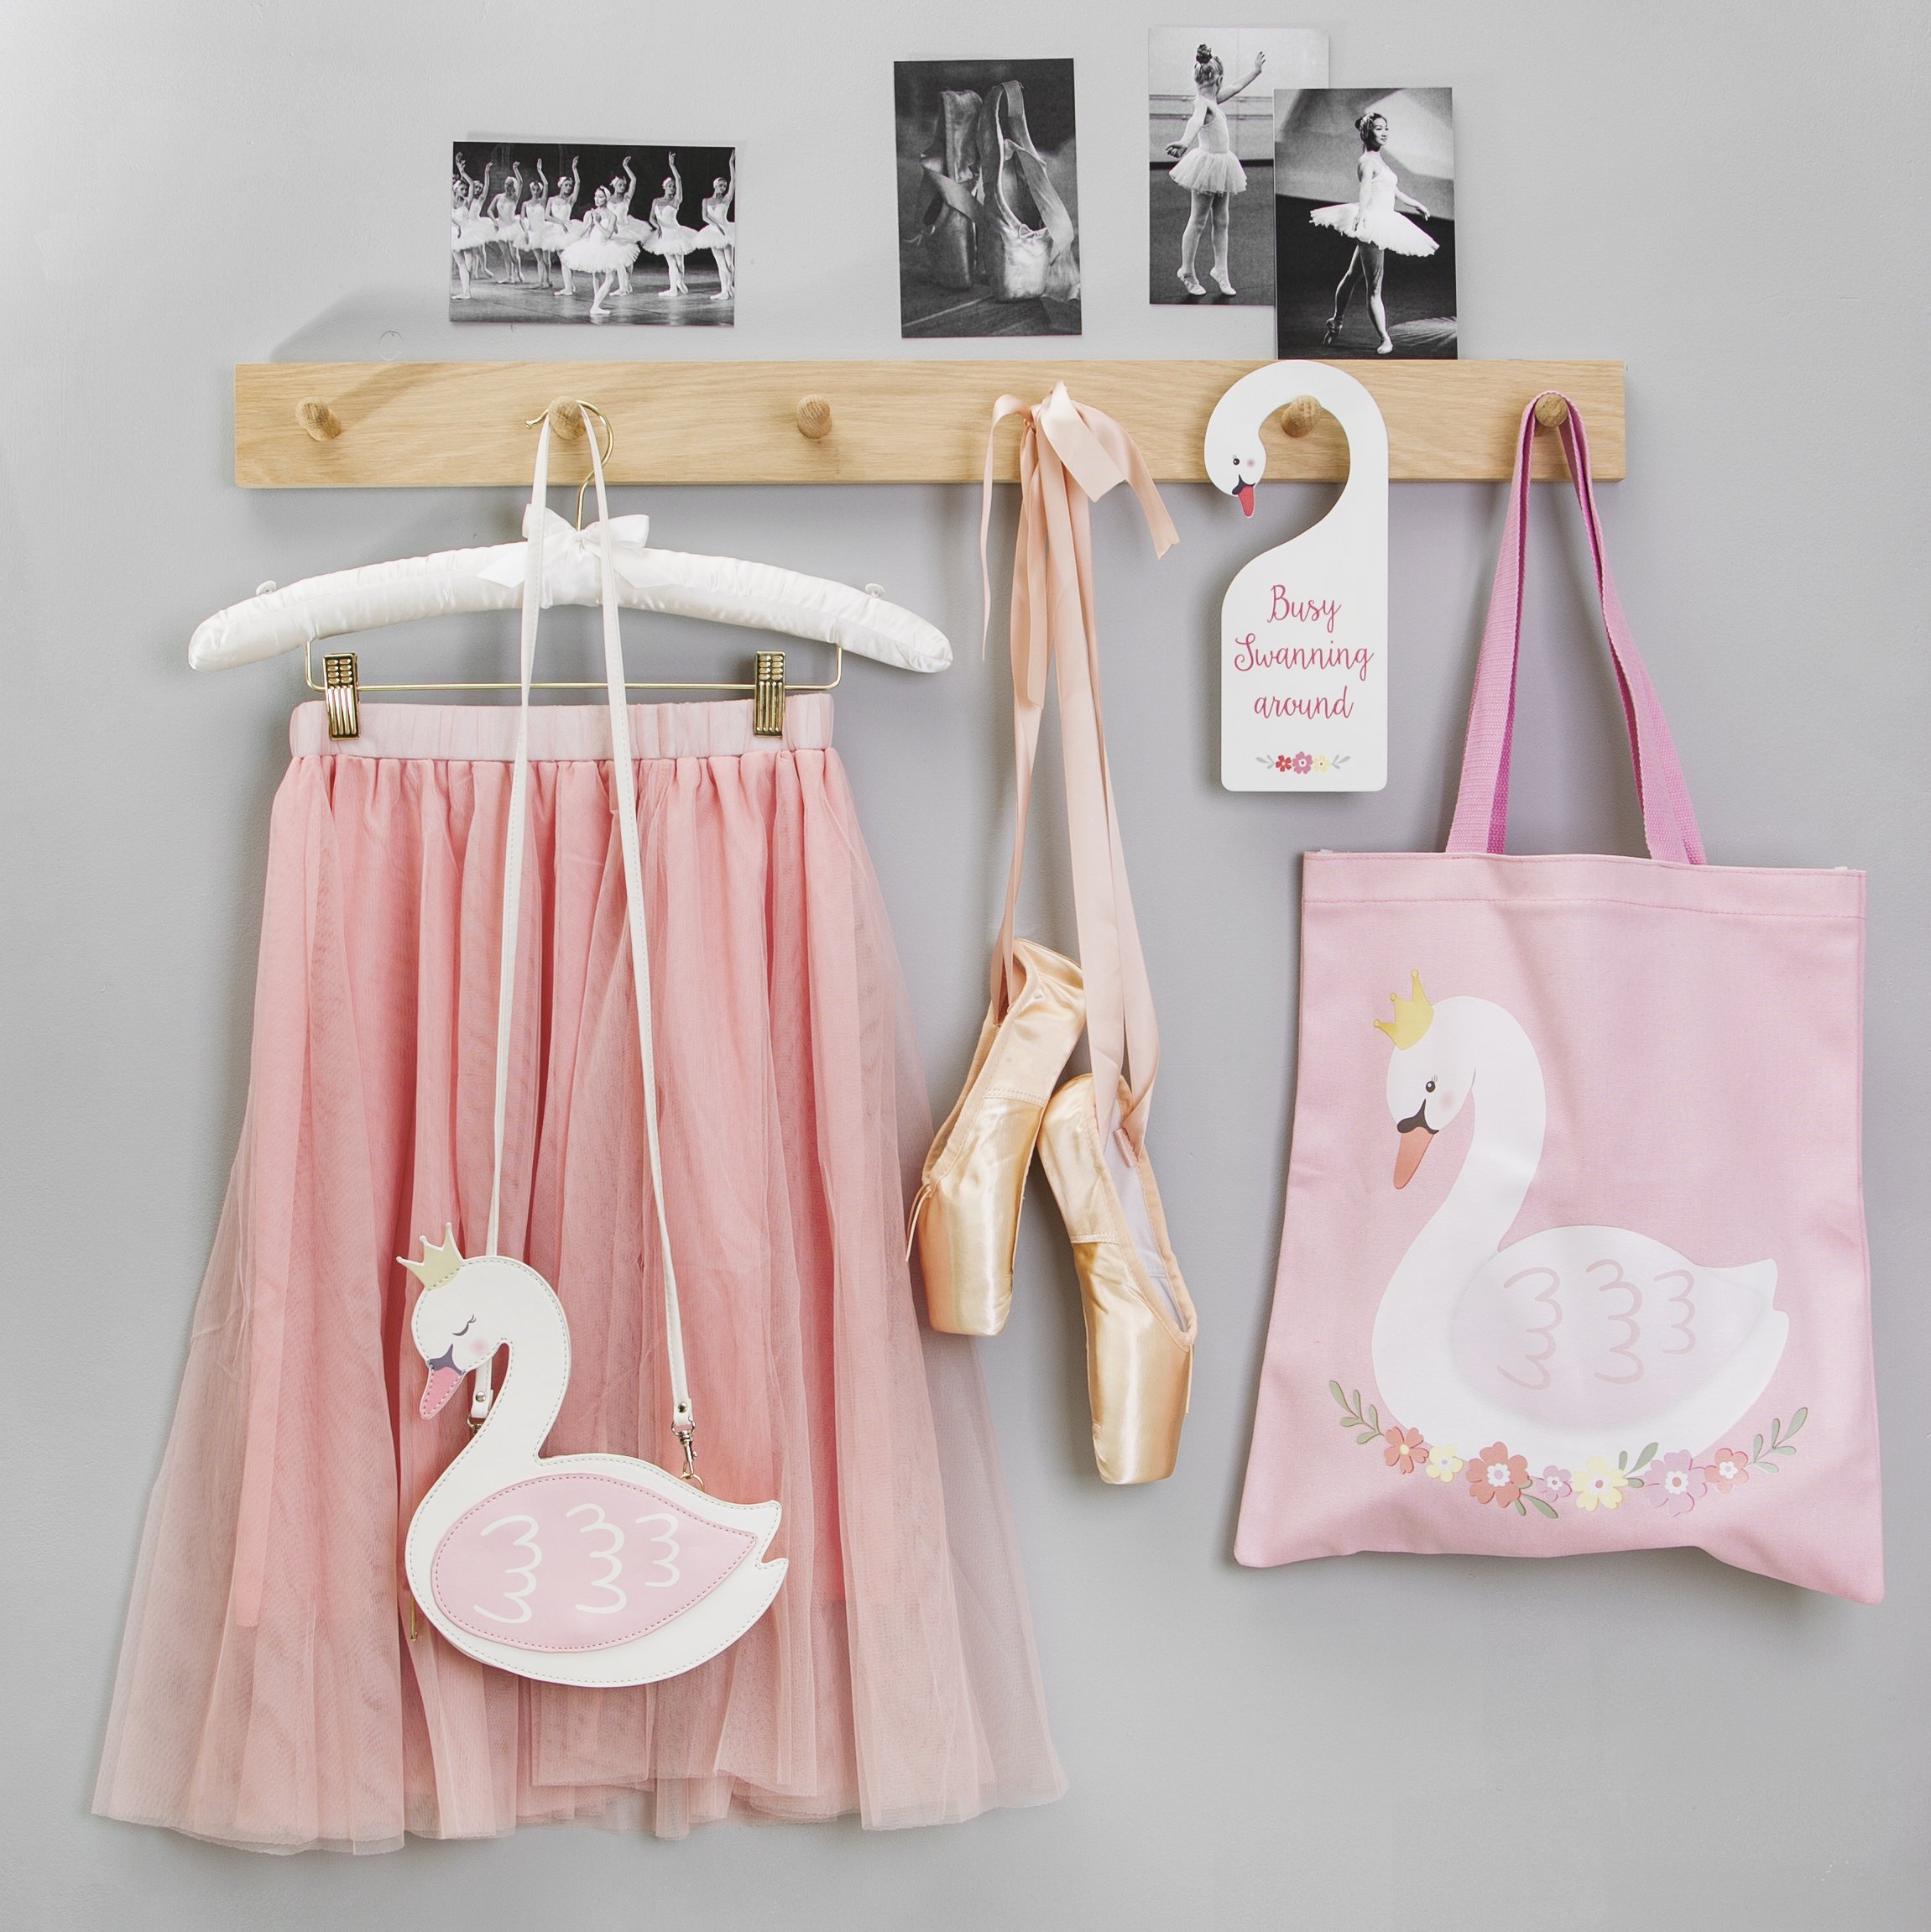 Cute Gifts, Homeware & Fashion Accessories UK - Sass and Belle